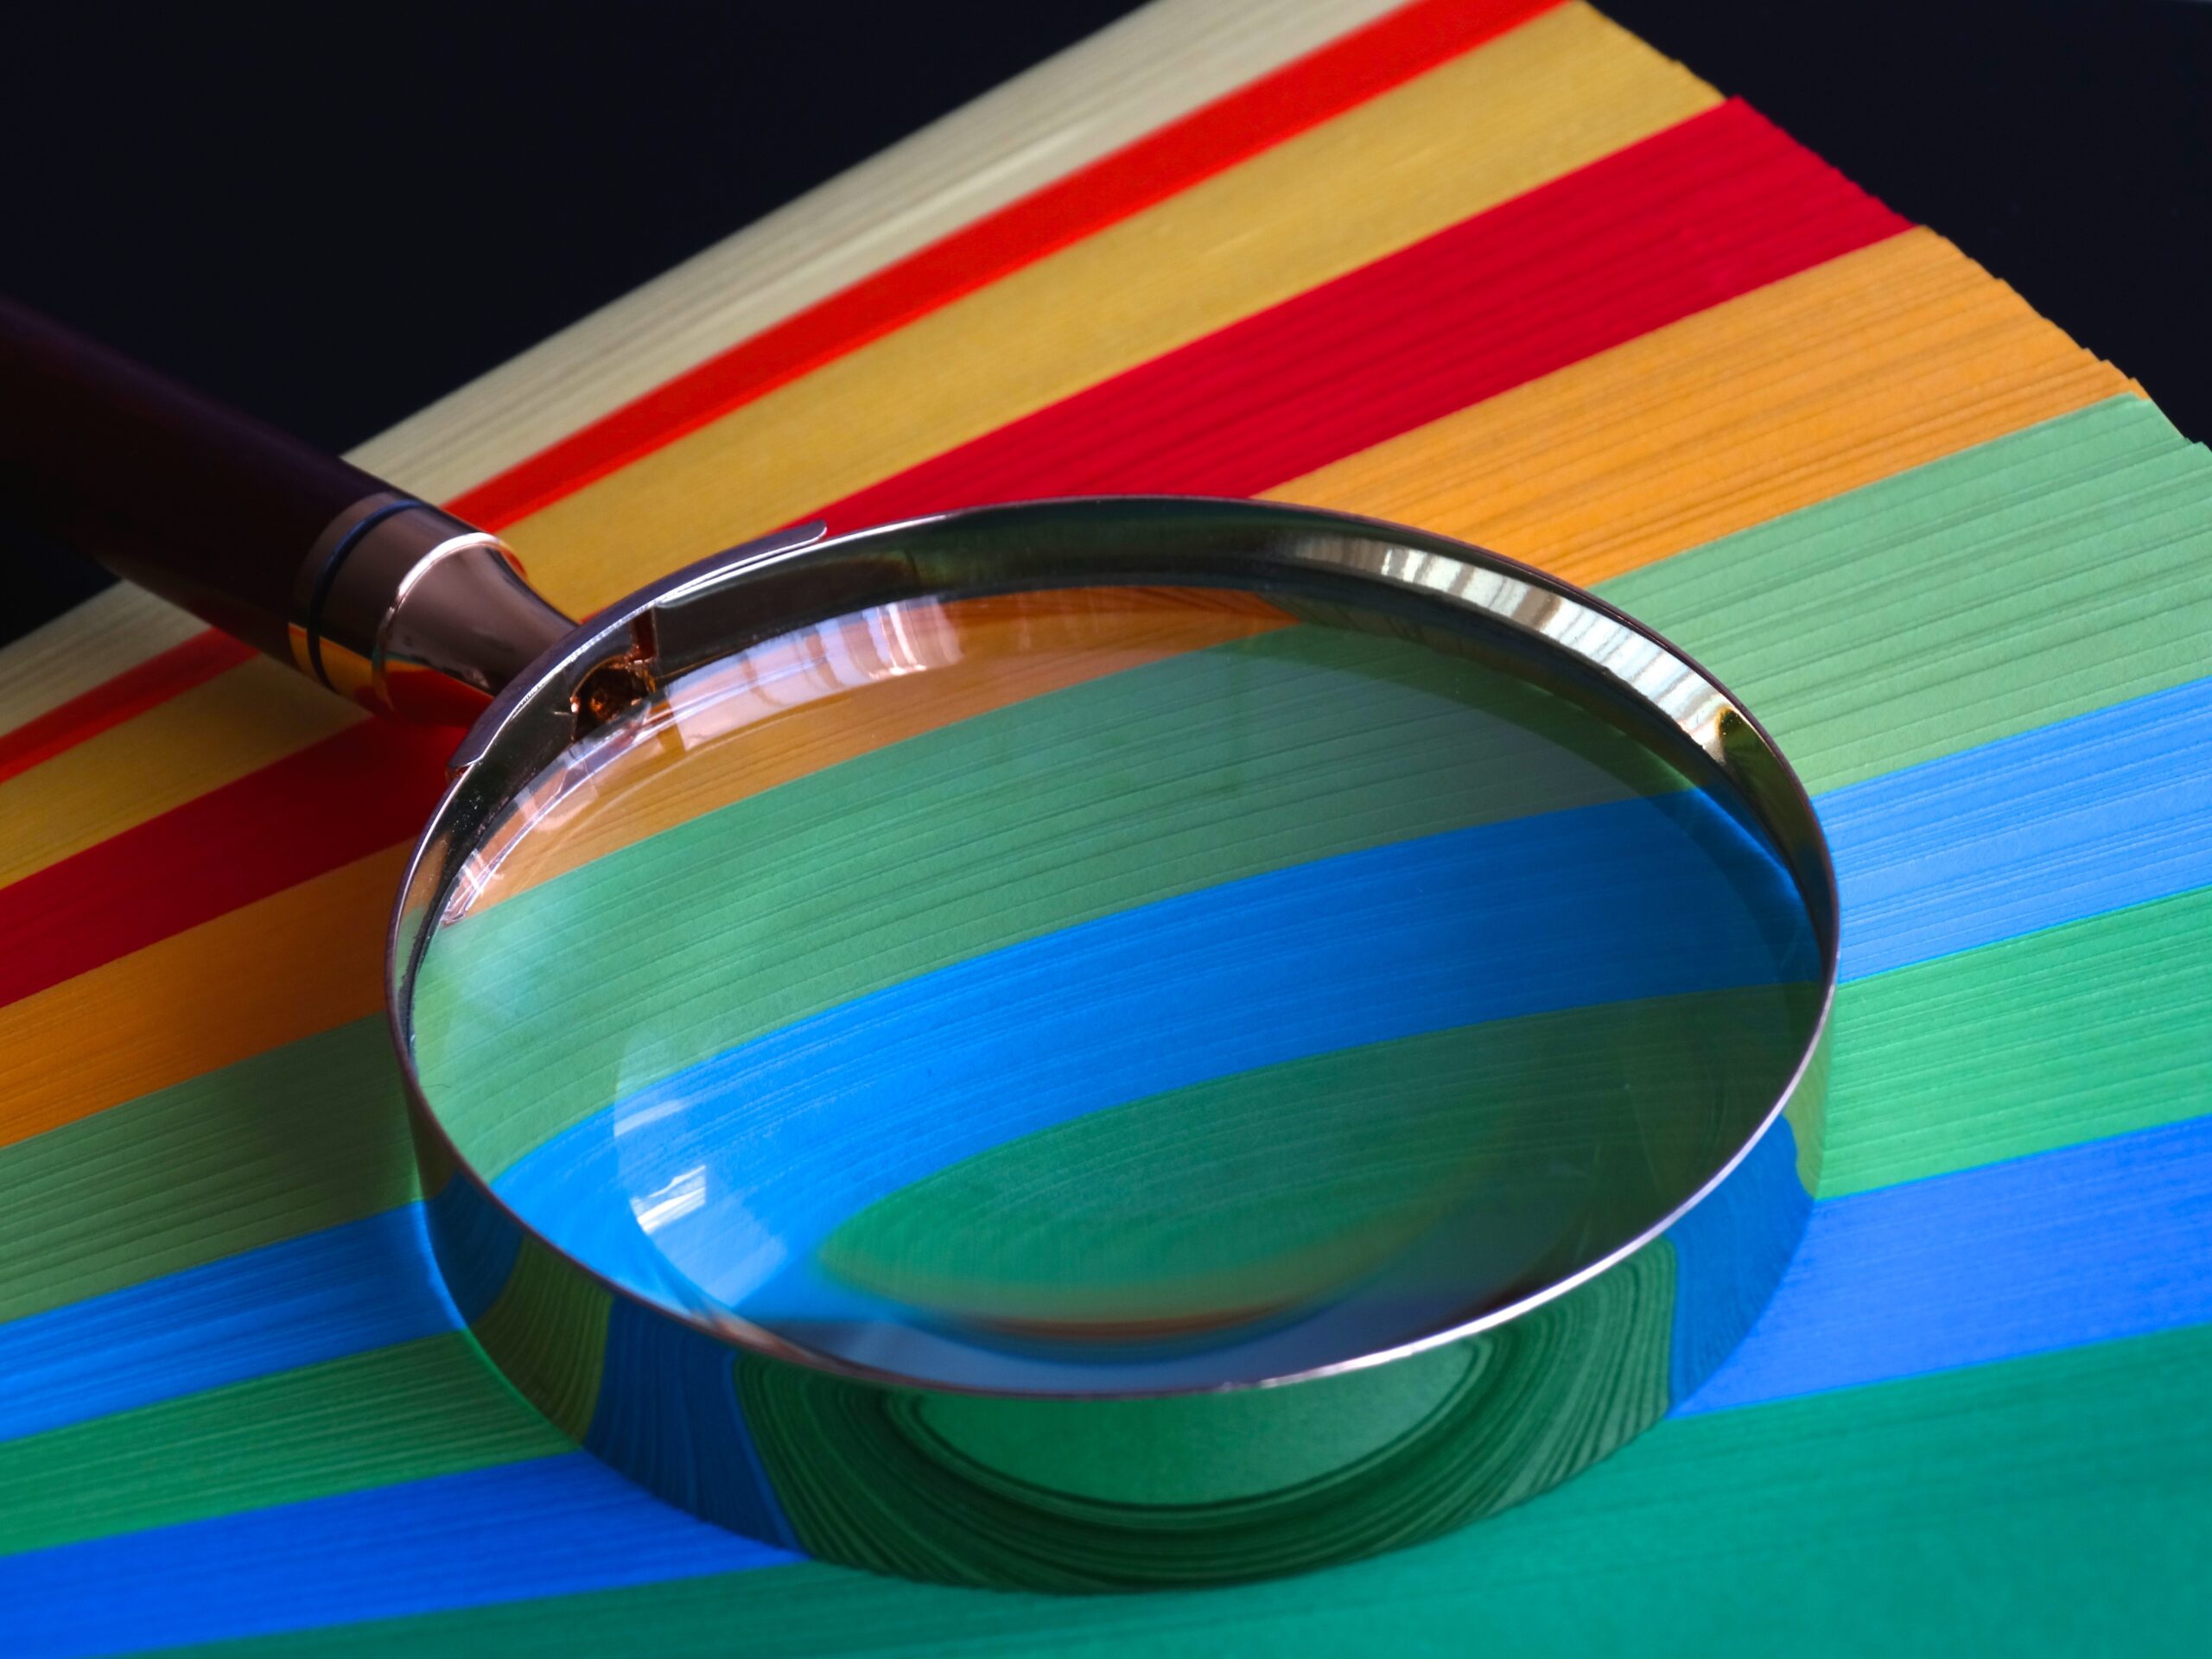 Magnifying glass over coloured paper - Rachel Writes proofreading service